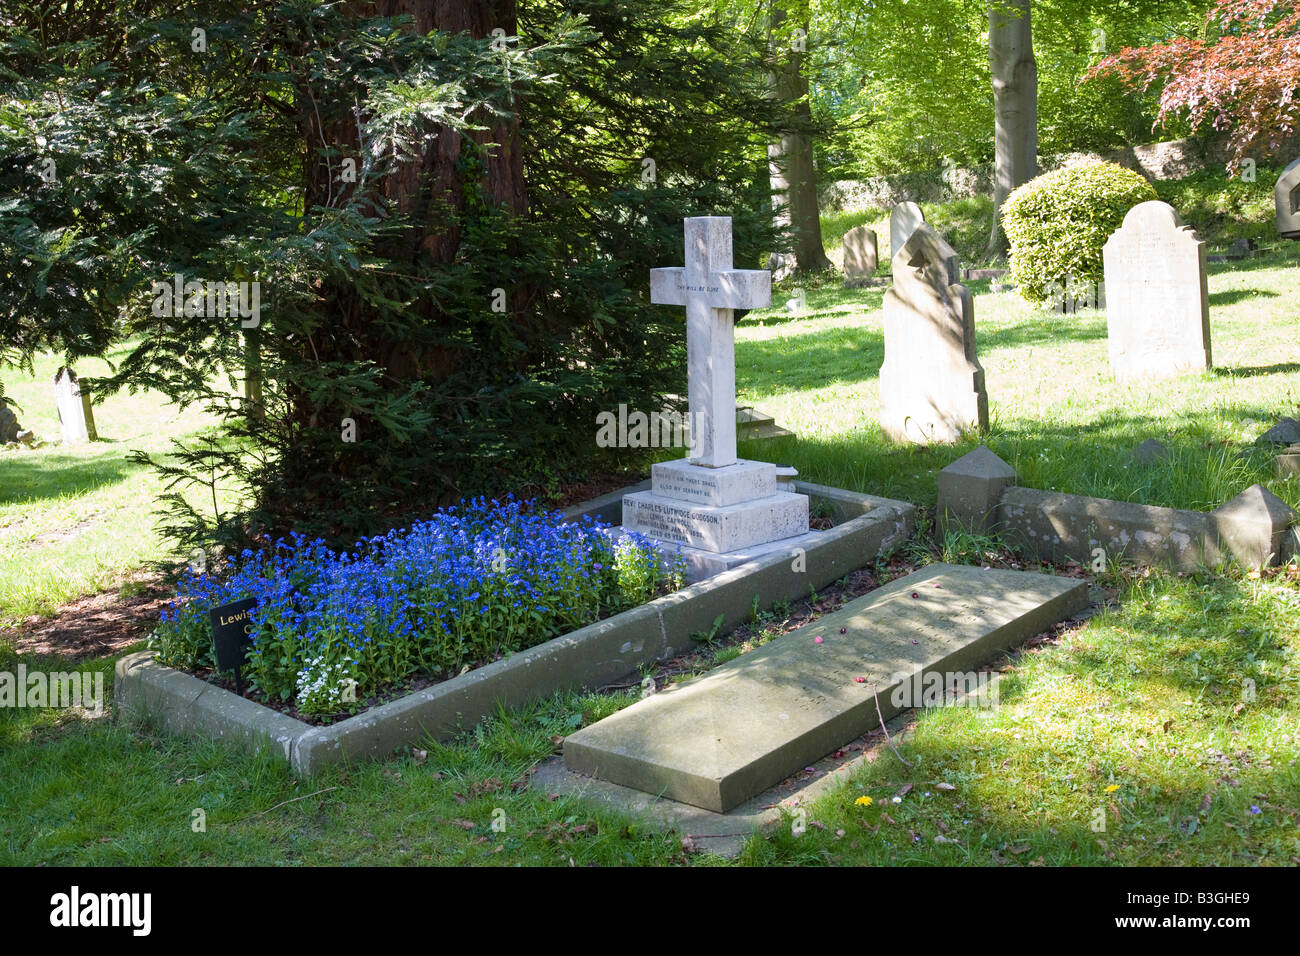 The grave of Charles Lutwidge Dodgson aka Lewis Carroll in the Mount Cemetery, Guildford, Surrey, England. Stock Photo